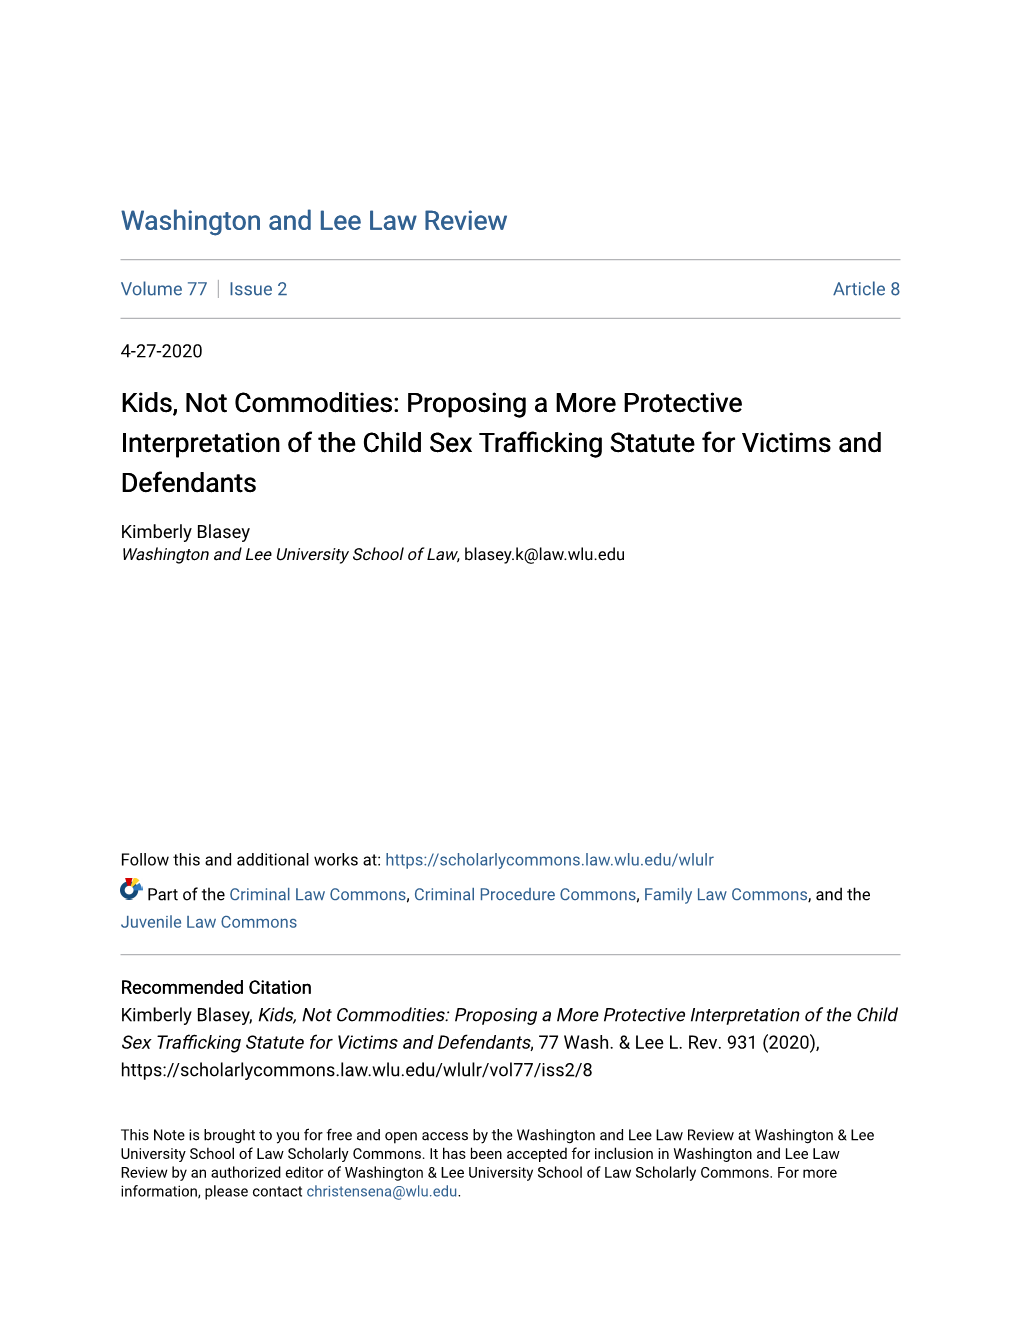 Kids, Not Commodities: Proposing a More Protective Interpretation of the Child Sex Trafficking Statute for Victims and Defendants